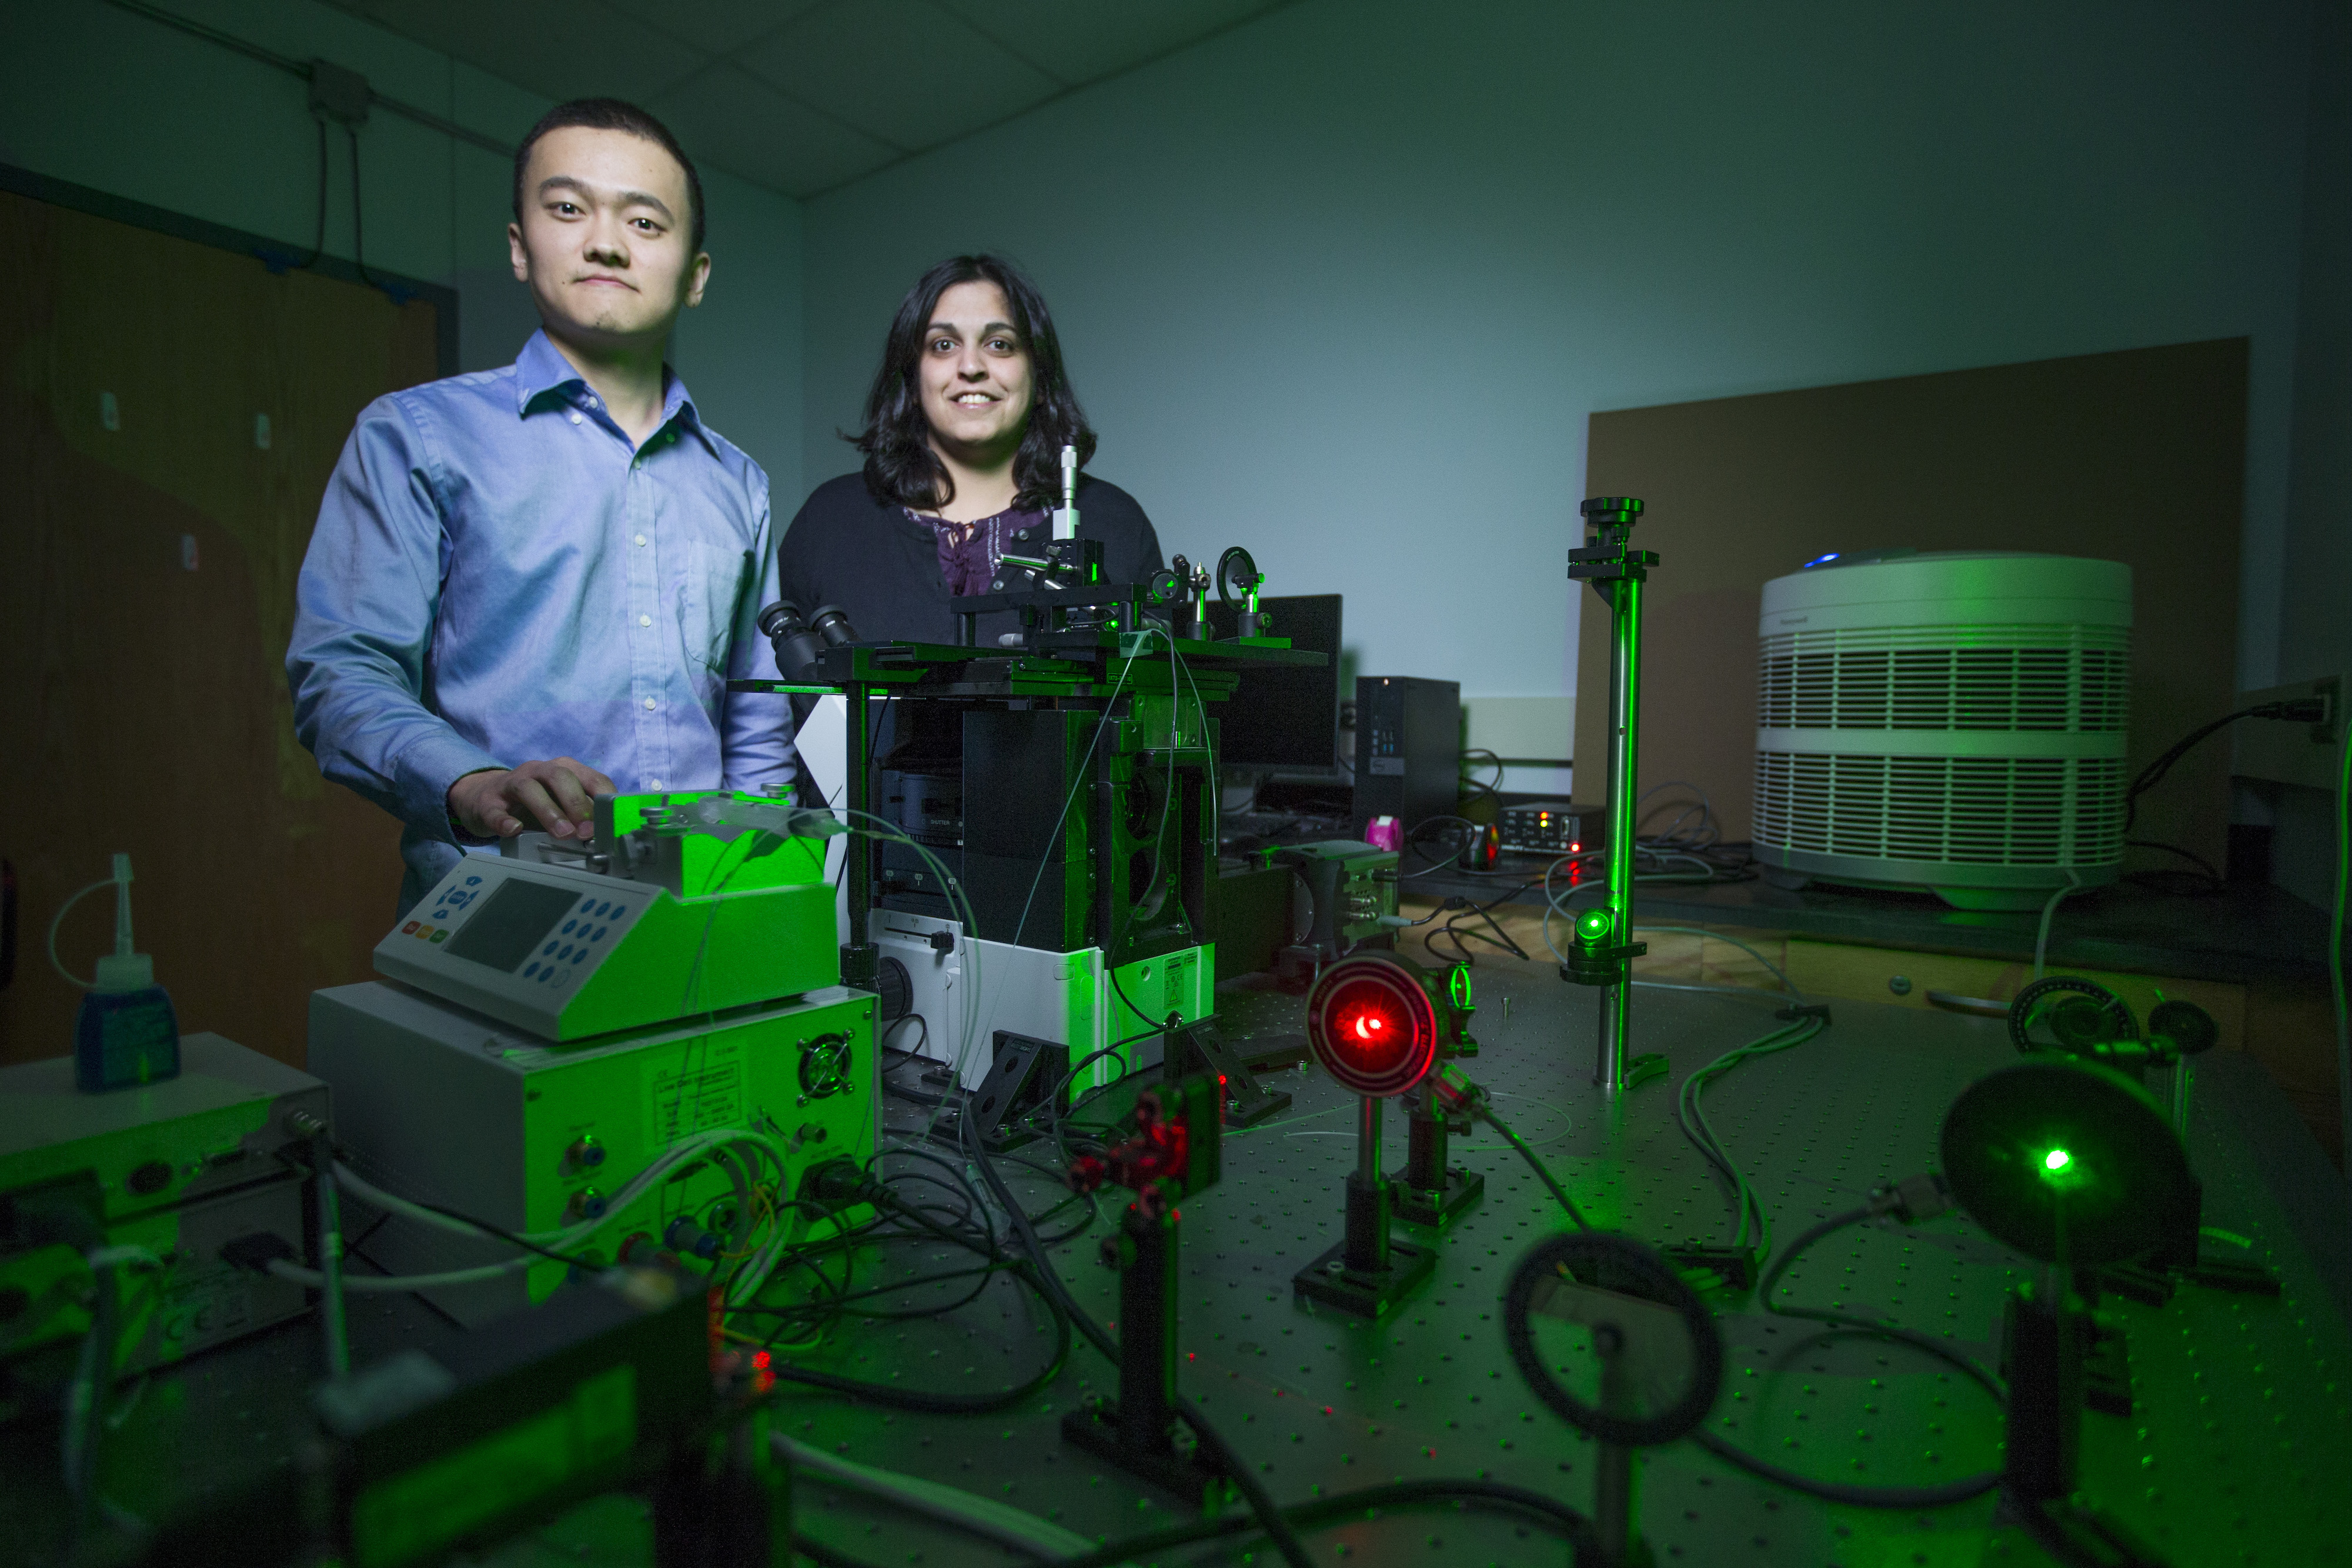 Chaoyou Xue and Dipali Sashital with the laser which enabled the visualization of how CRISPR proteins search DNA. (Christopher Gannon/Iowa State University)